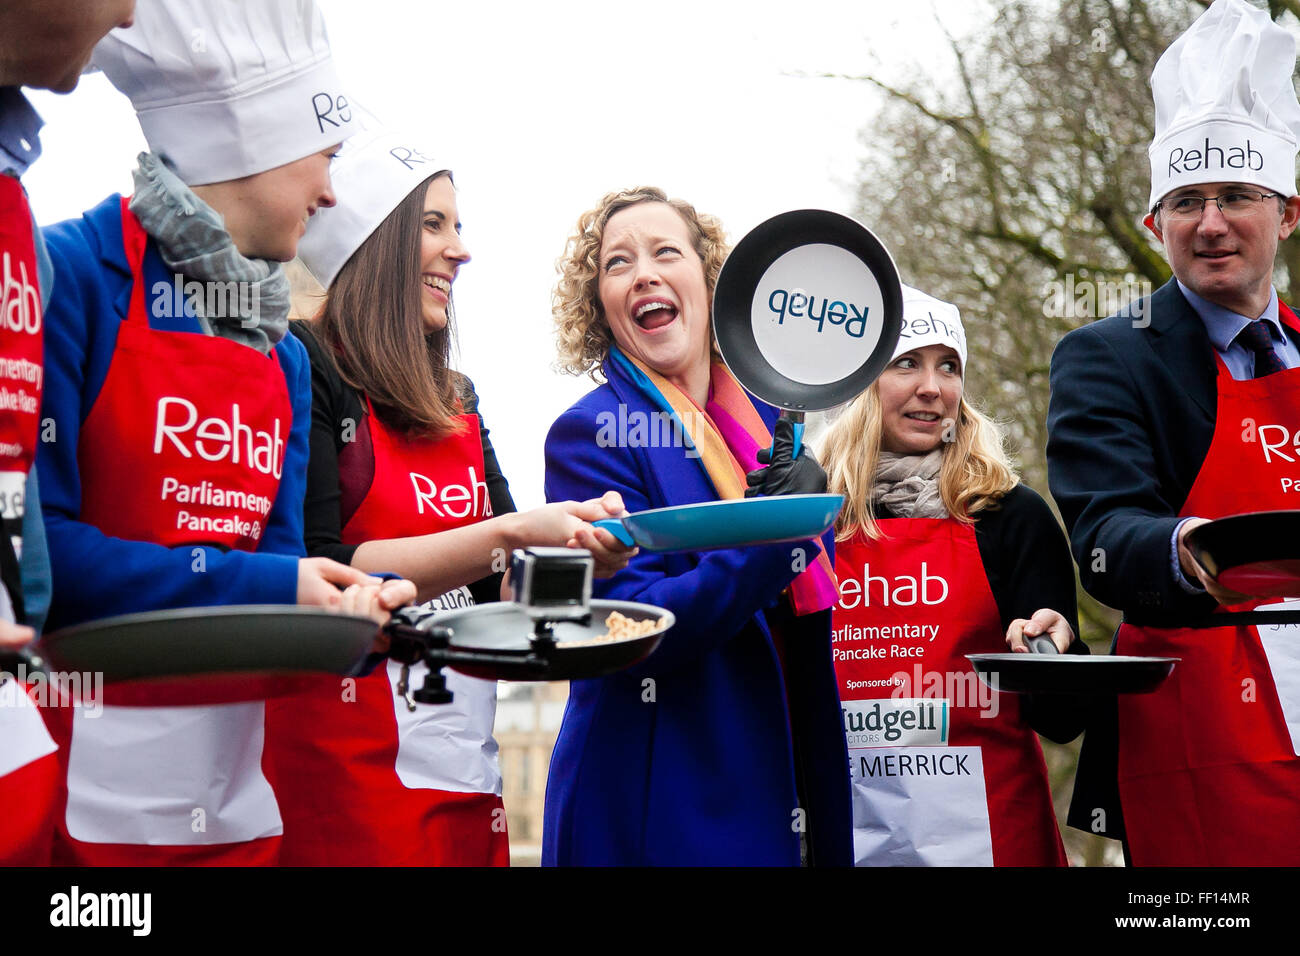 Westminster, London, United Kingdom. February 9th, 2016 - The media team at the annual Parliamentary pancake race in aid of the disability charity Rehab Credit:  Dinendra Haria/Alamy Live News Stock Photo